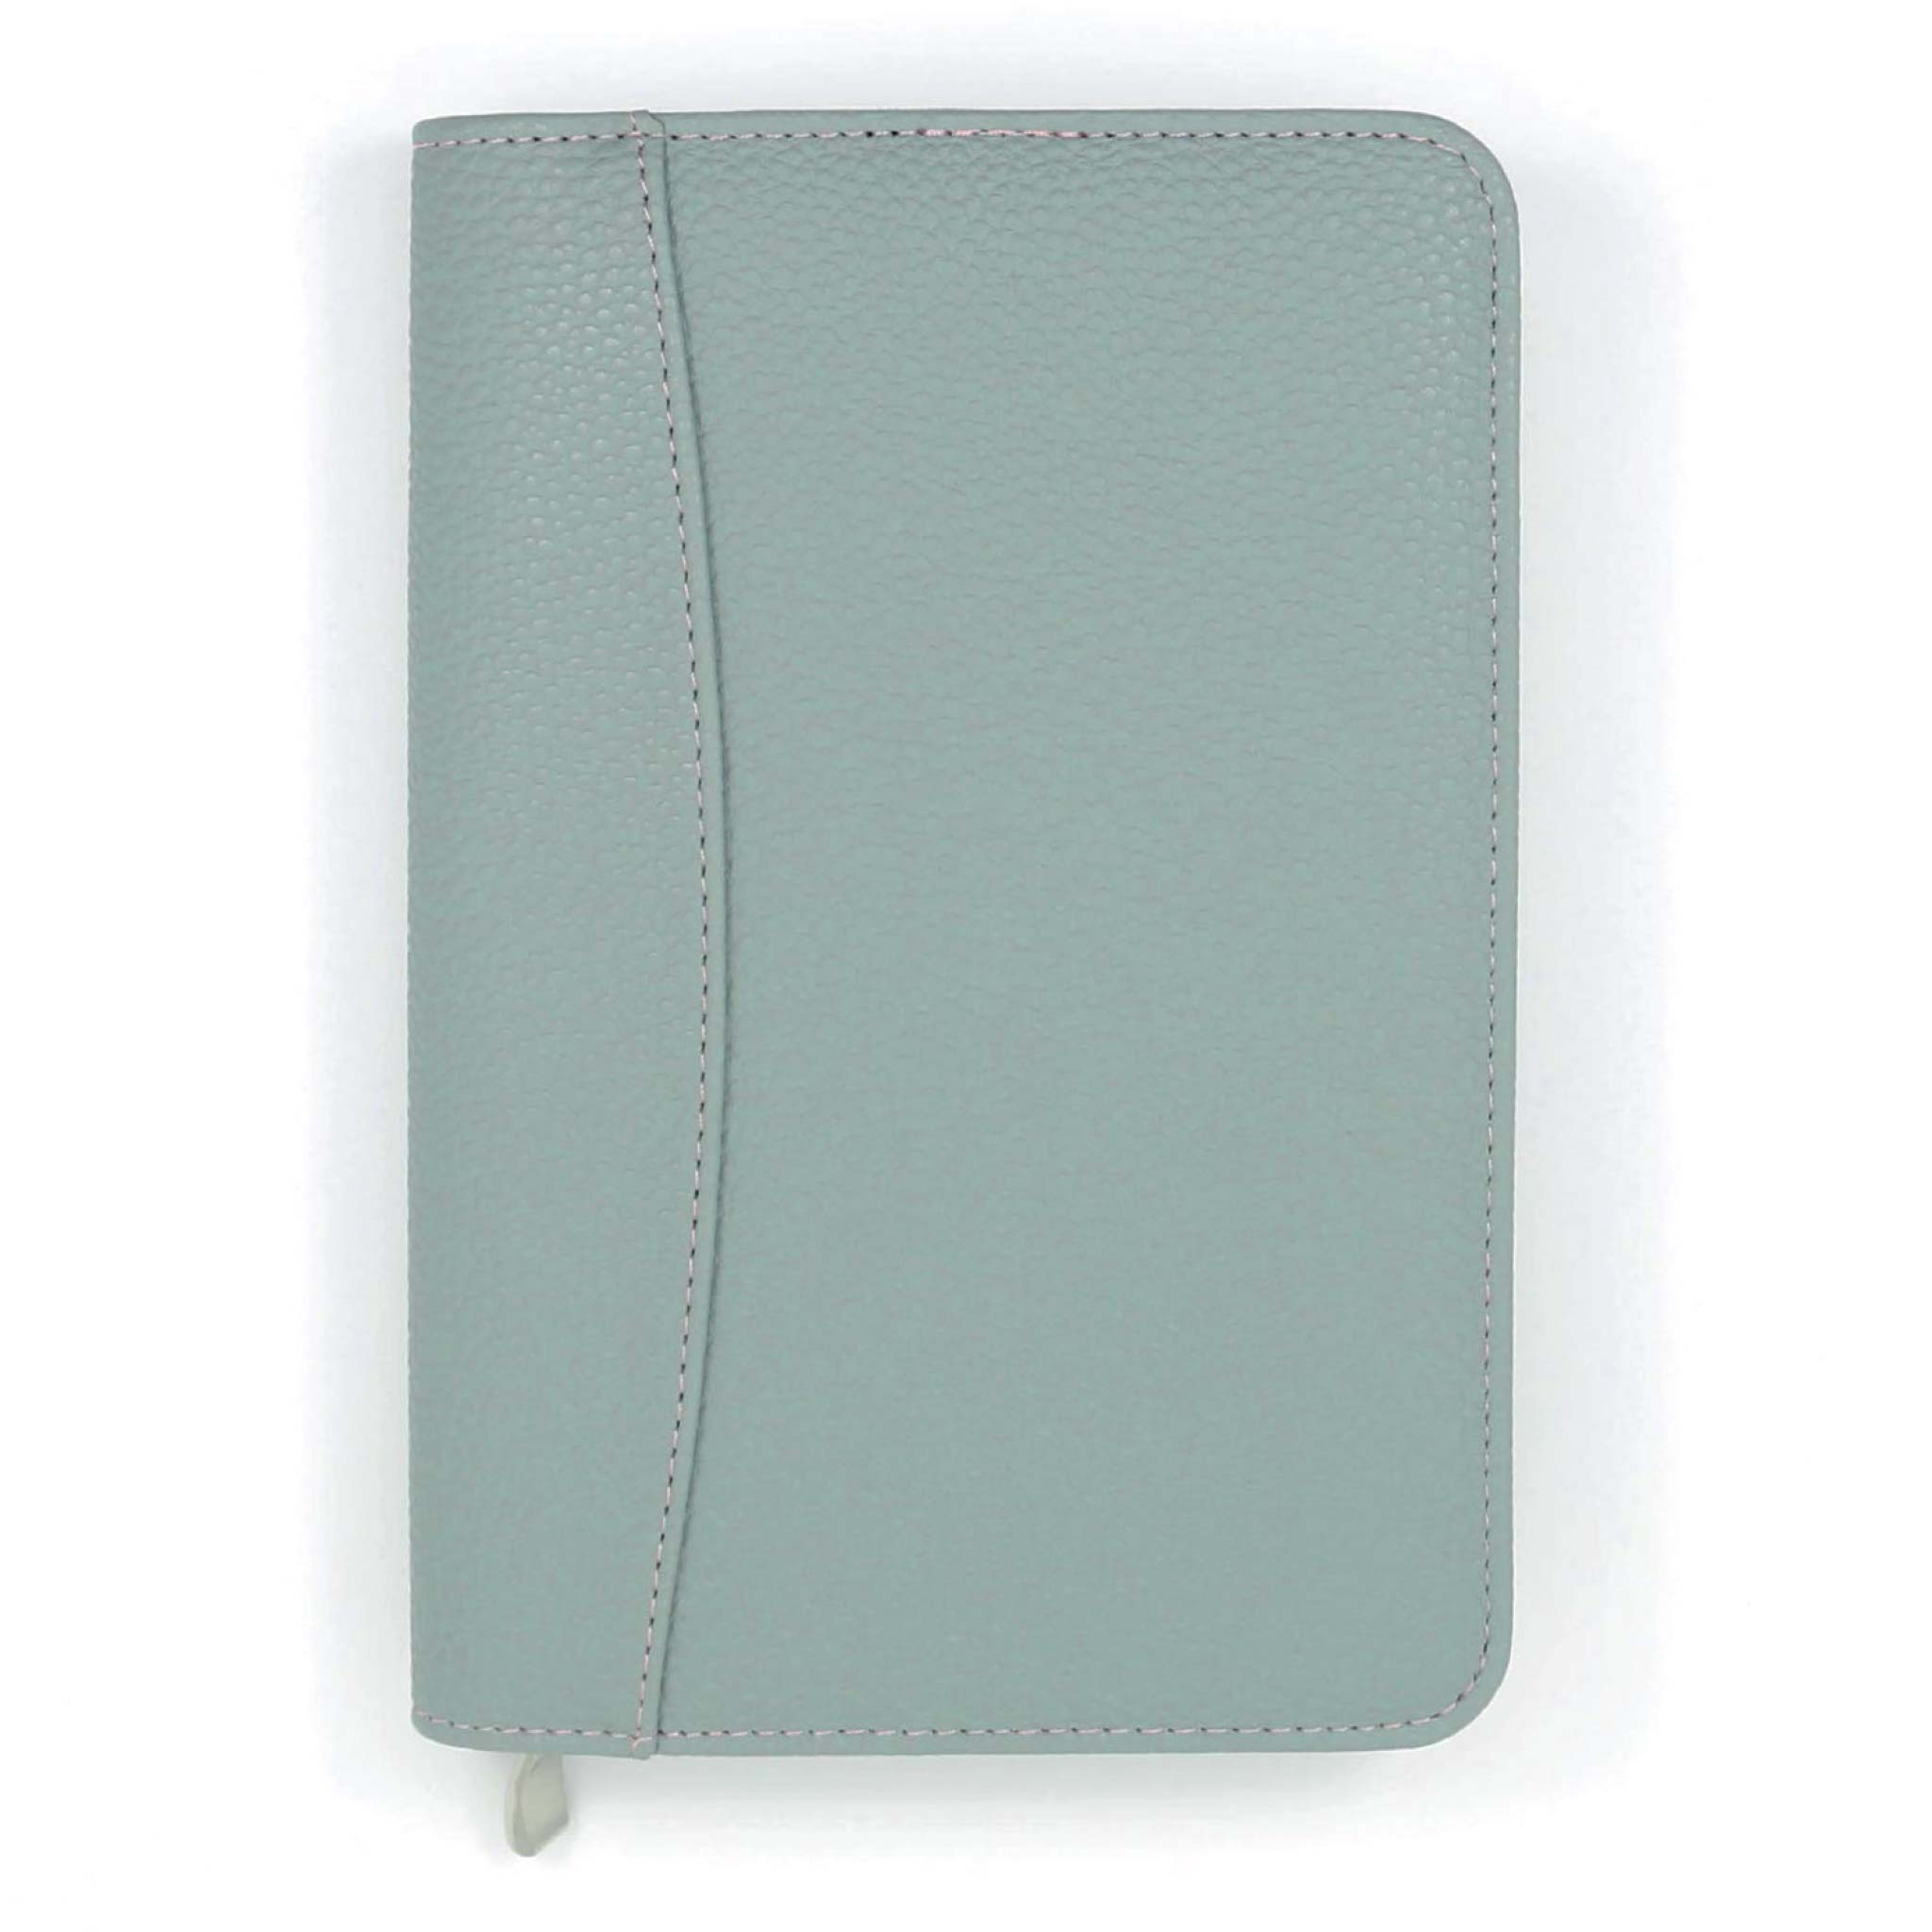 An image of Pocket Life Book Diary Cover I Full-Zip Slimline Cover with Pocket Juniper